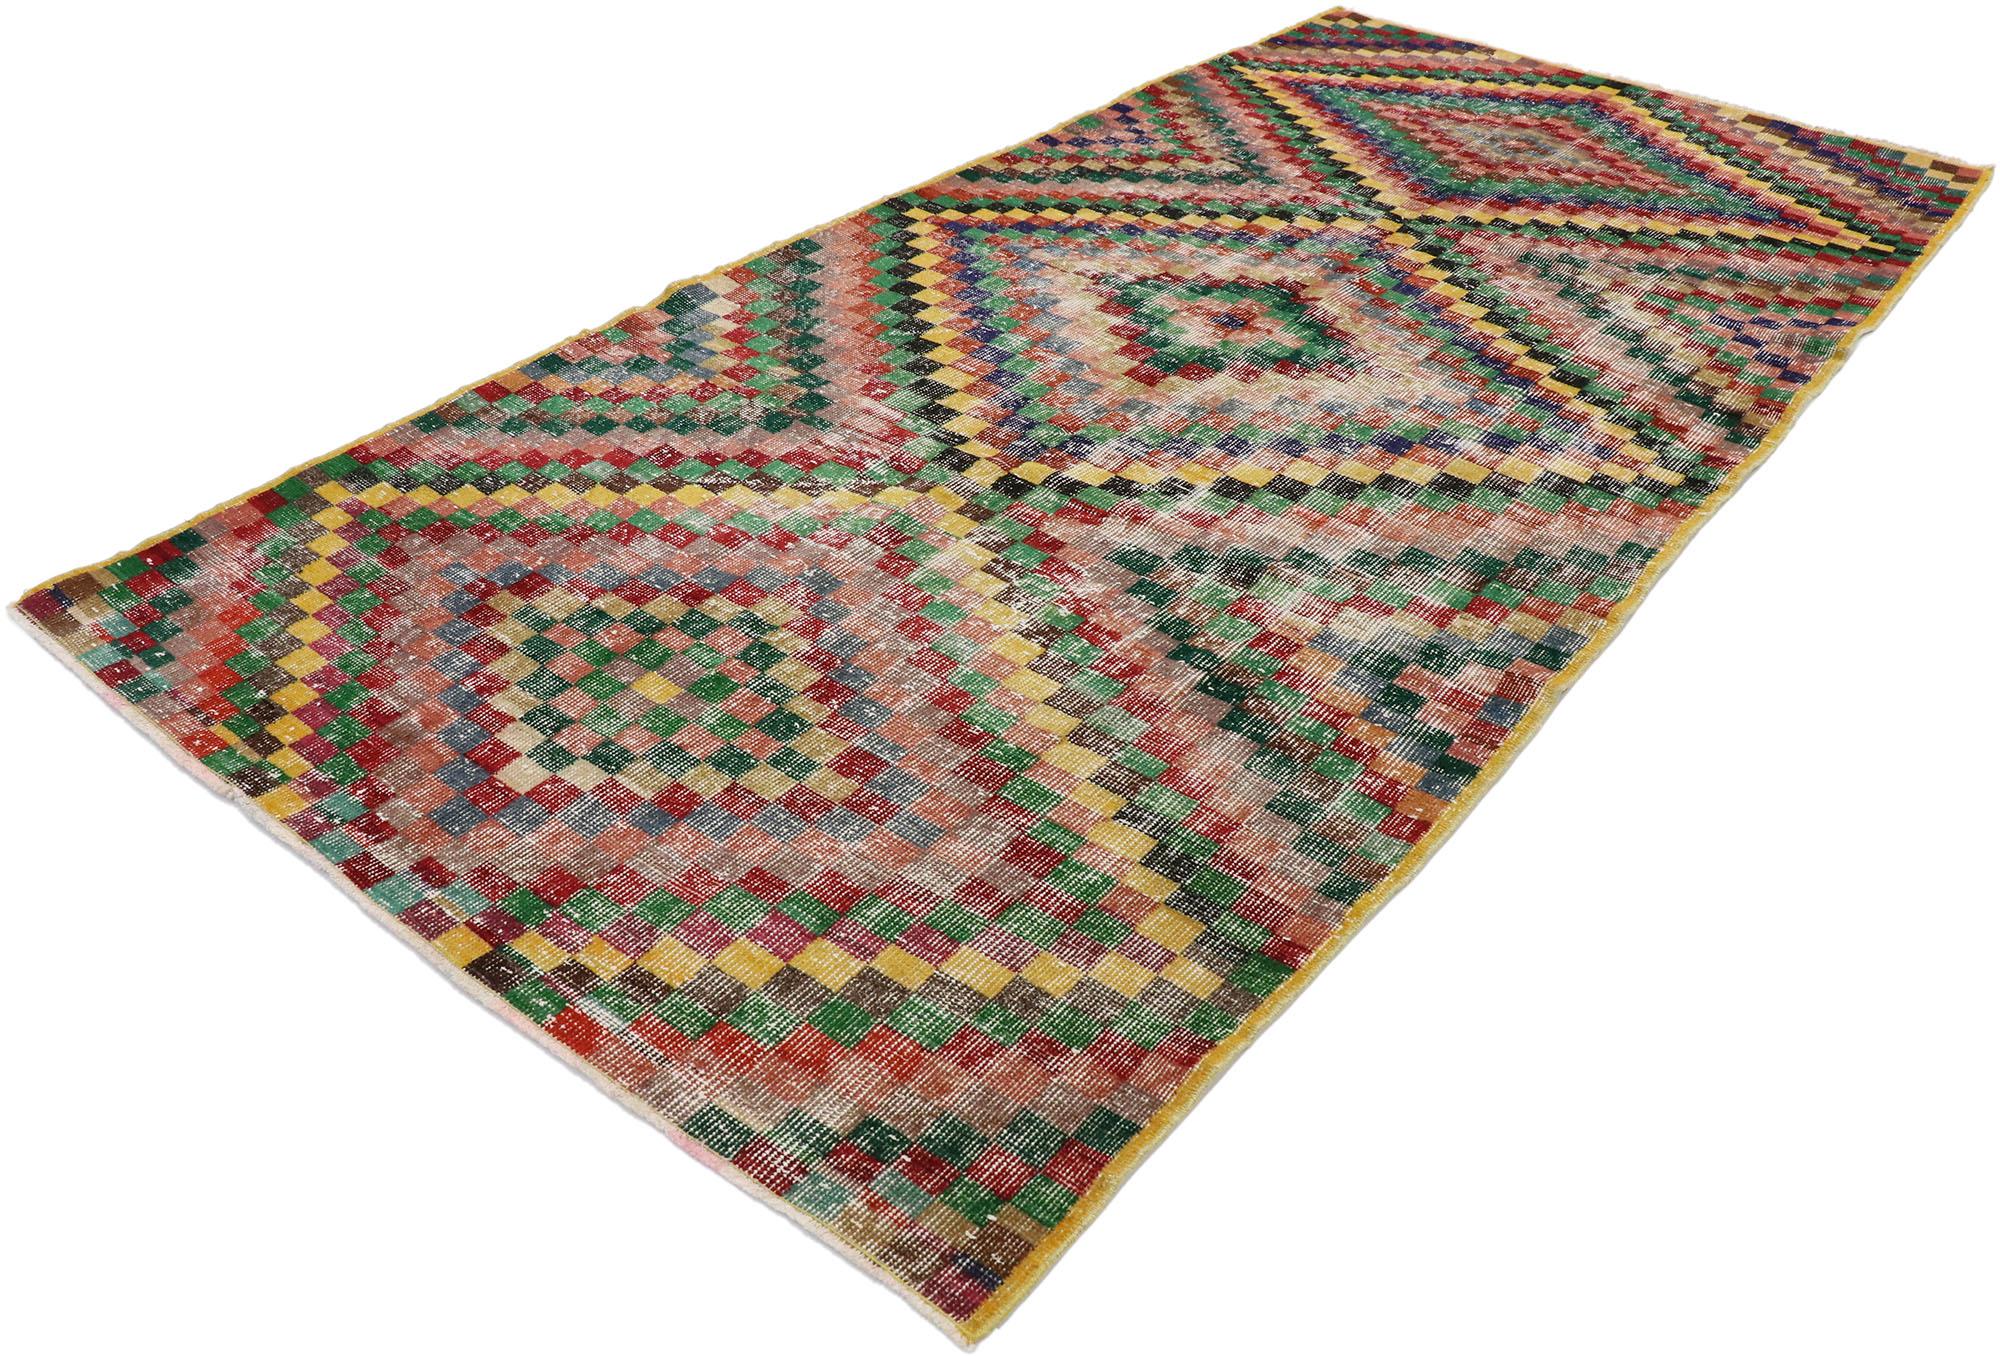 53294 distressed vintage Turkish Sivas rug with rustic Mid-Century Modern style. This hand knotted wool distressed vintage Turkish Sivas rug features an all-over checkerboard pattern comprised of multicolored squares. The colors are arranged in a